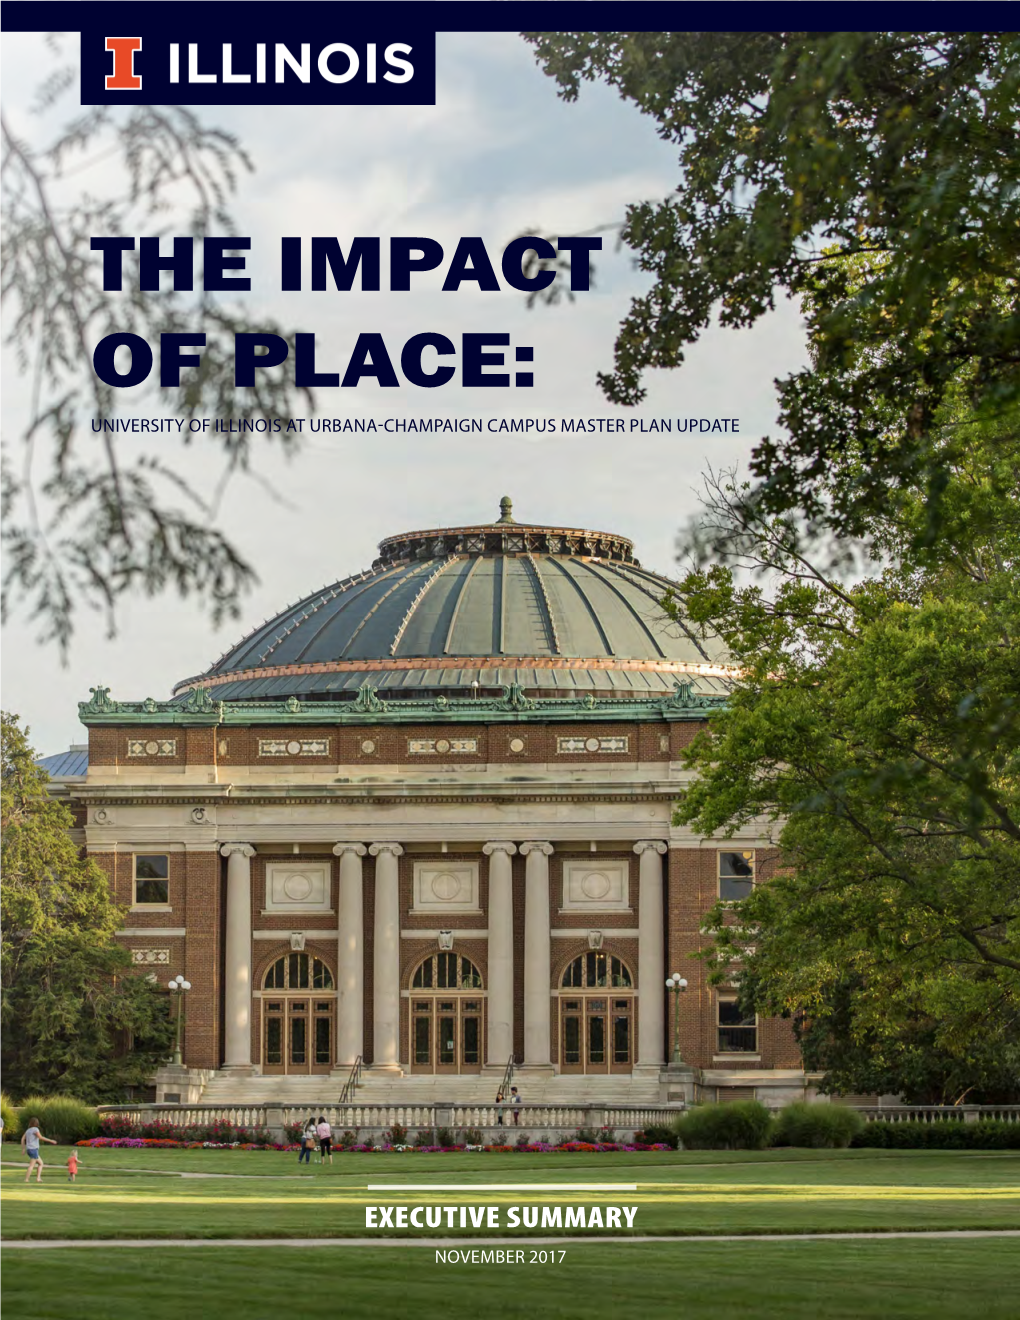 The Impact of Place: University of Illinois at Urbana-Champaign Campus Master Plan Update